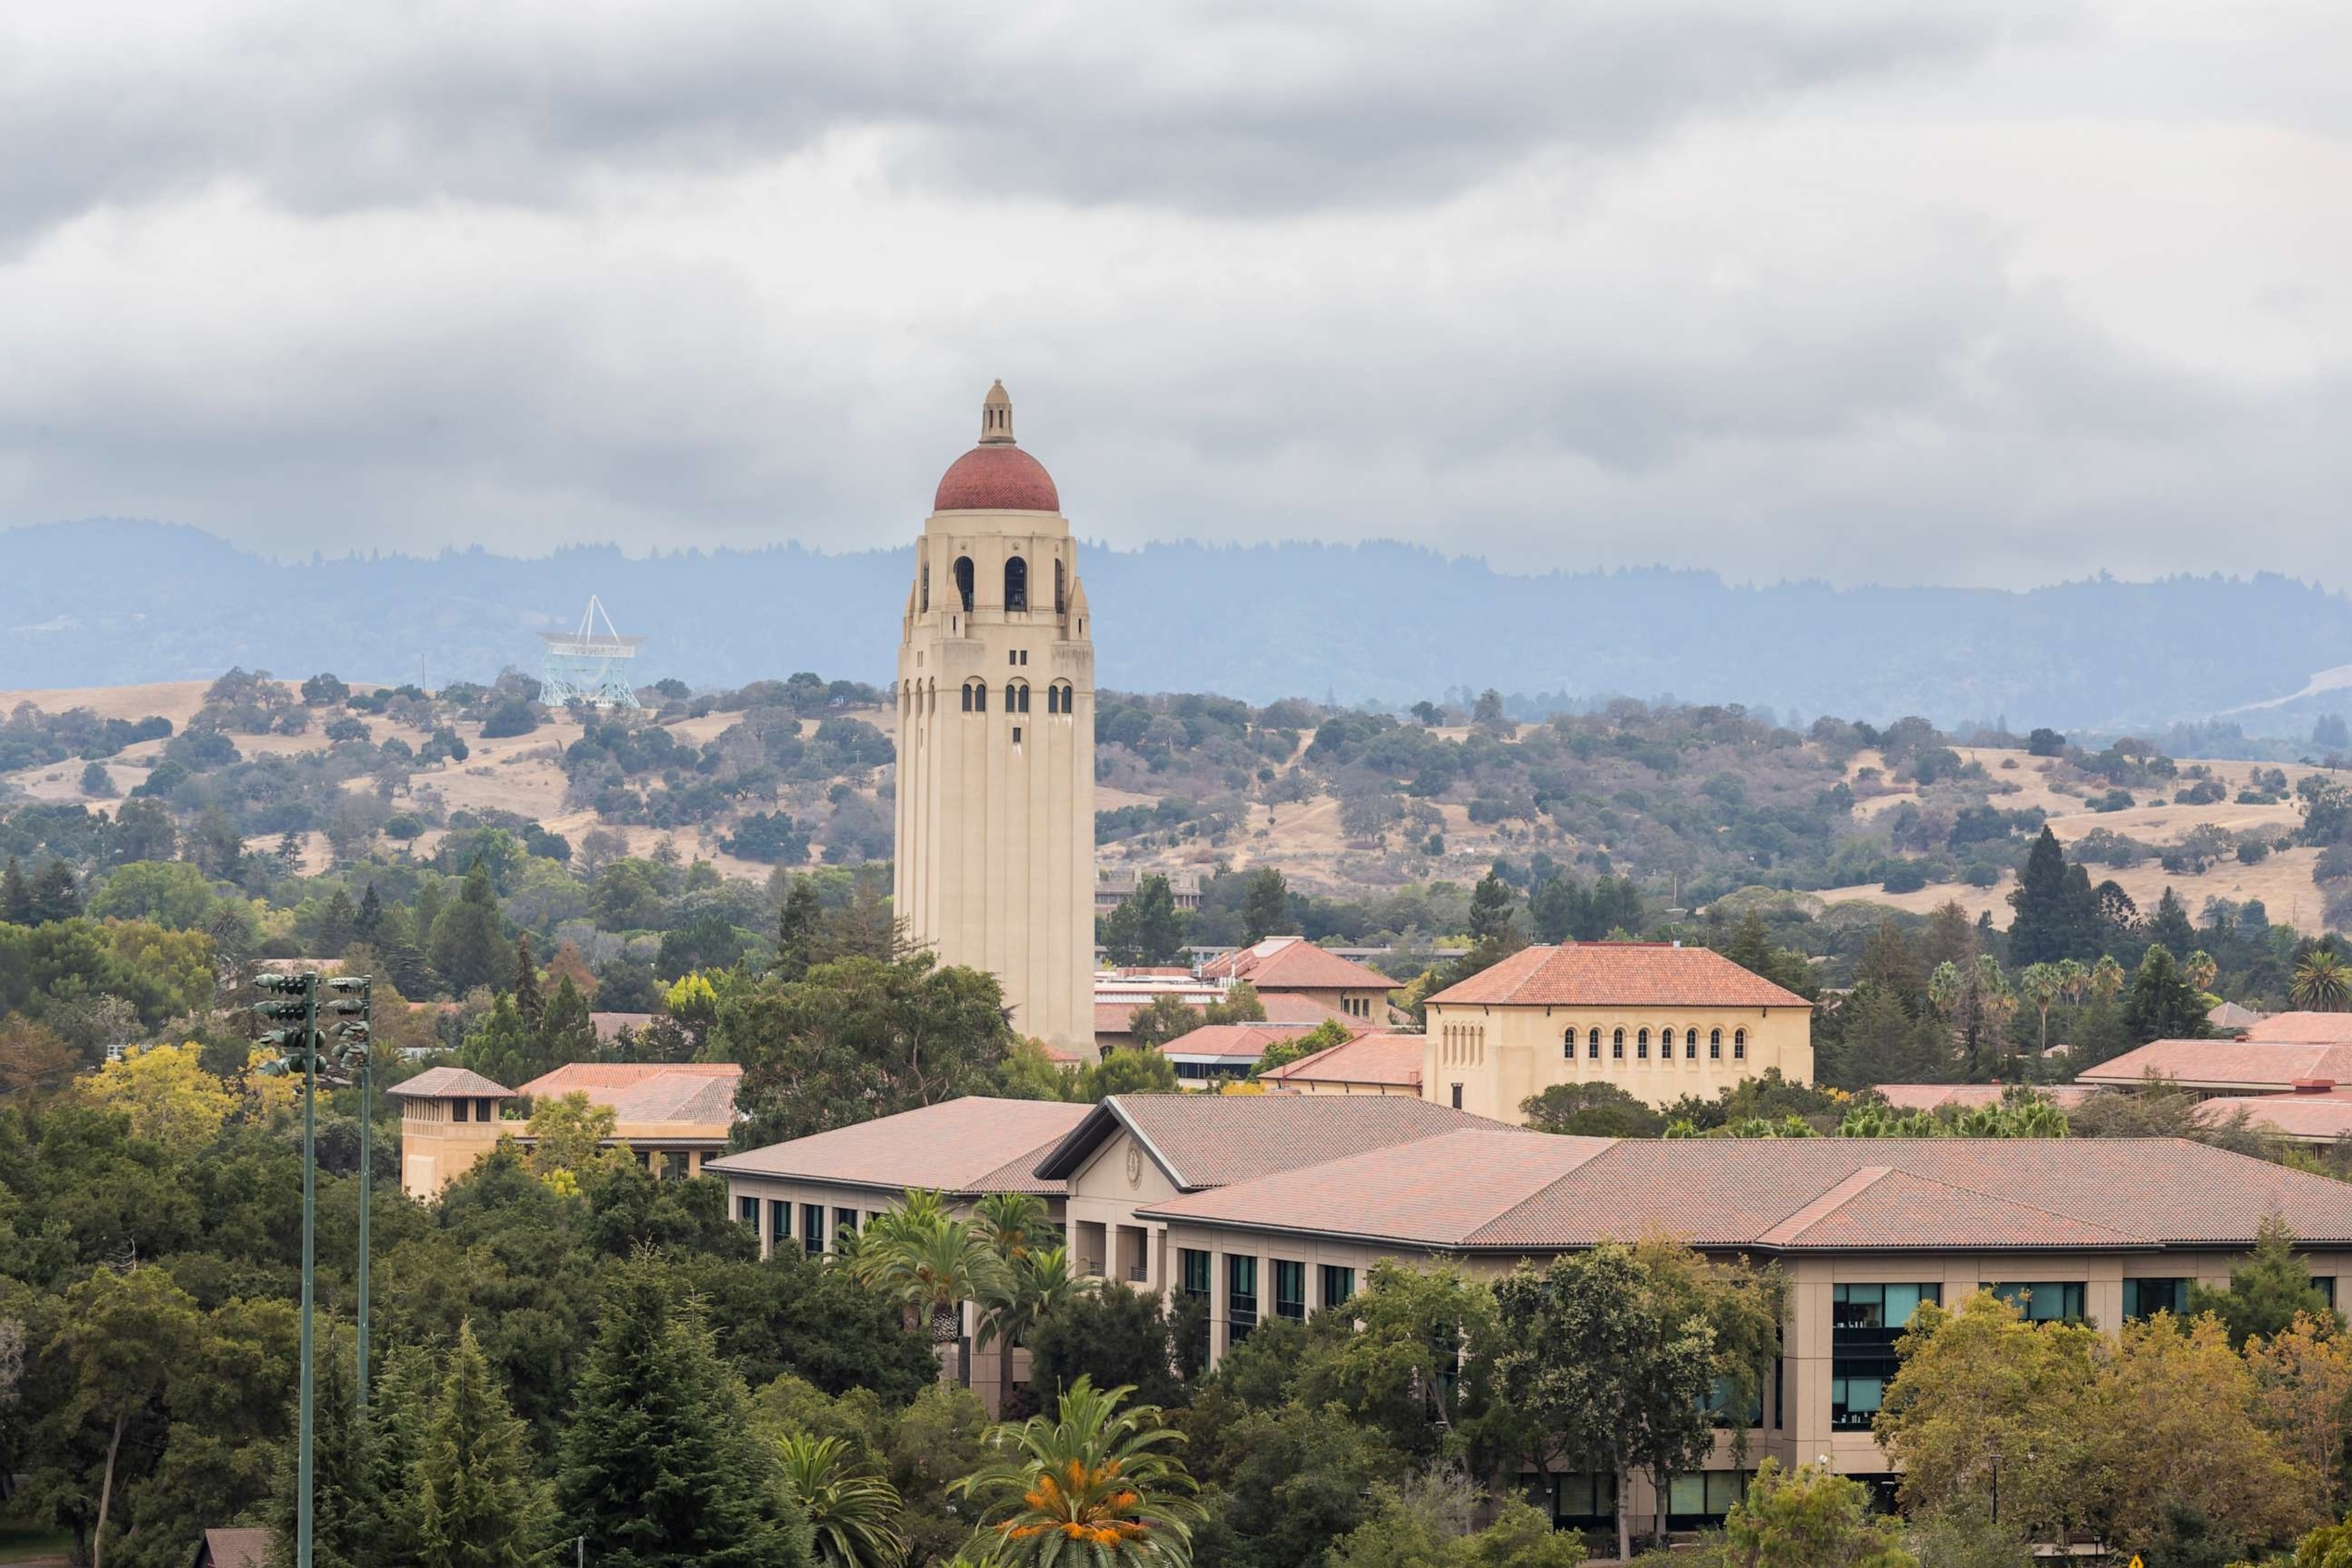 PHOTO: File image of a general view of the campus of Stanford University including Hoover Tower as seen from Stanford Stadium on Sept. 10, 2022 in Palo Alto, Calif.